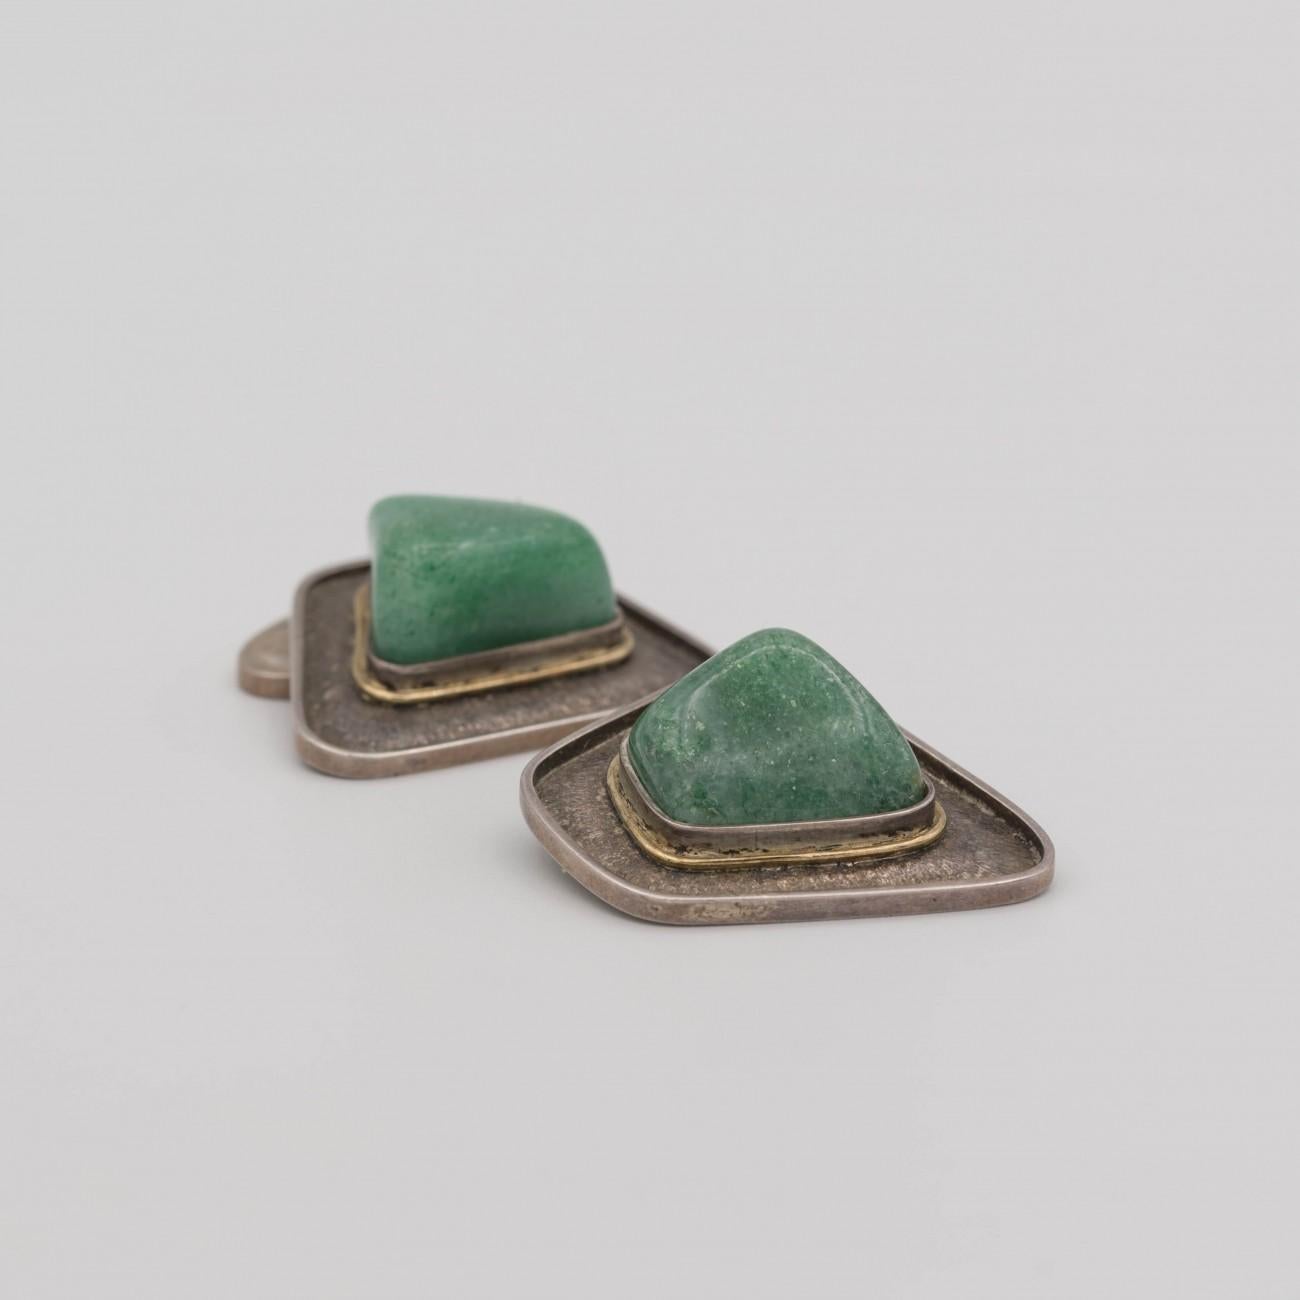 English Aventurine stone cufflinks with bark decorated silver and silver-gilt mounts. Hallmarked London 1975 Maker RDS.

Dimensions: 26 mm x 30 mm x 11 mm

Bentleys are Members of LAPADA, the London and Provincial Antique Dealers Association.